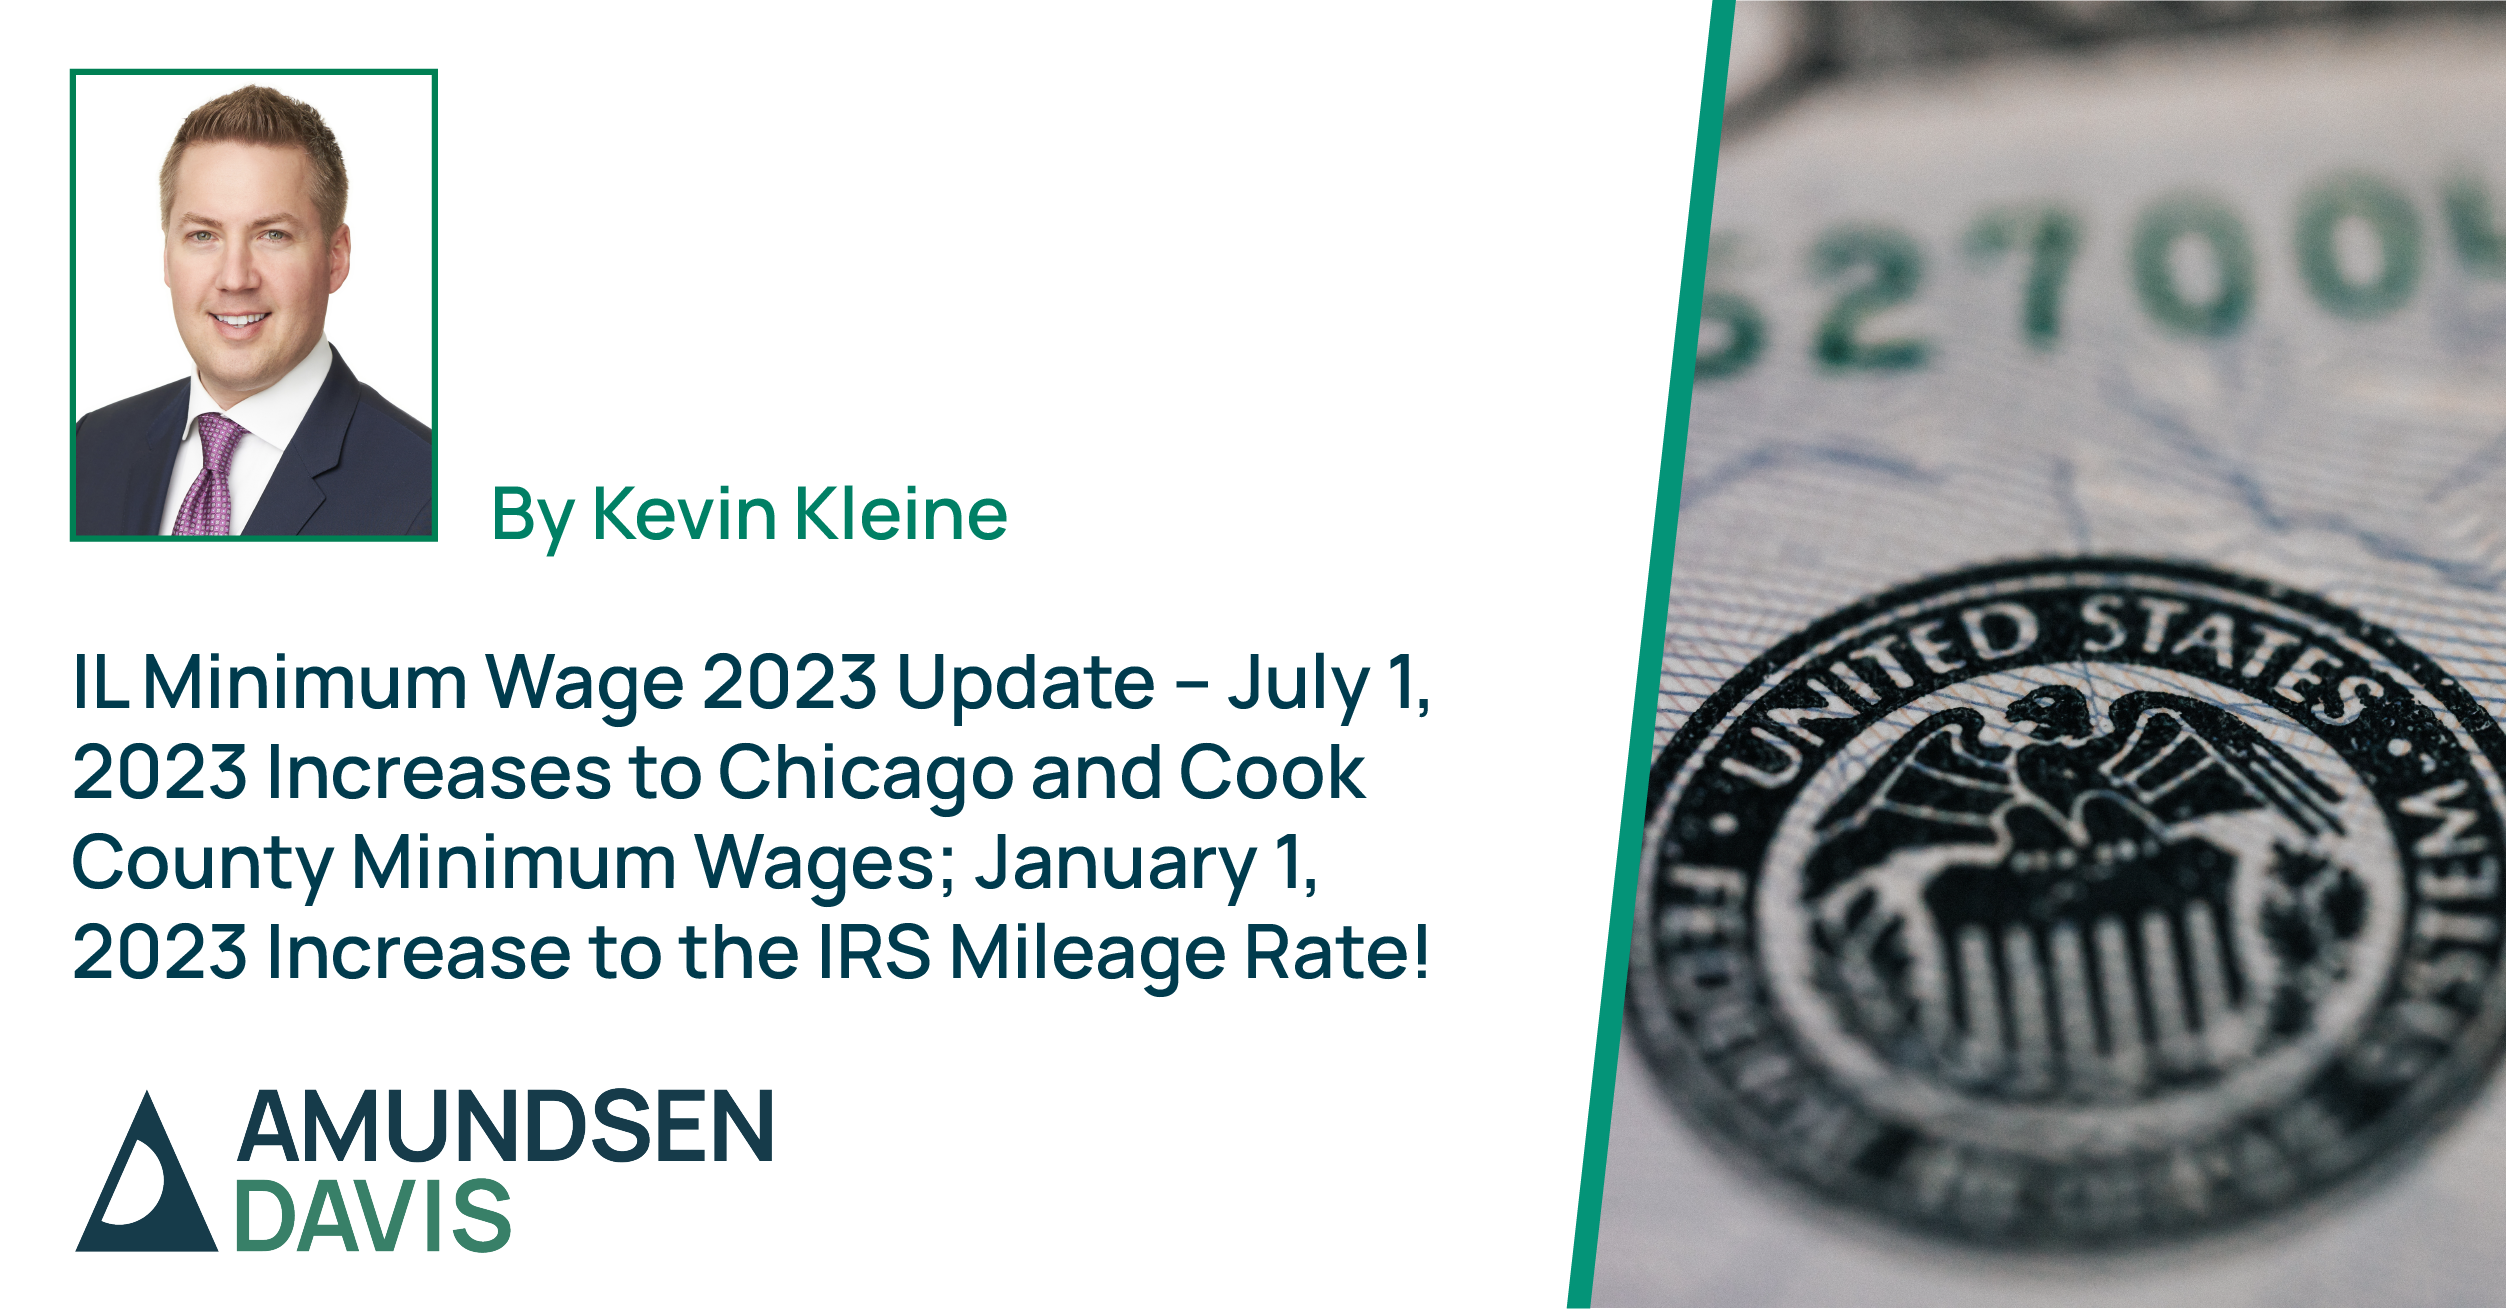 IL Minimum Wage 2023 Update July 1, 2023 Increases to Chicago and